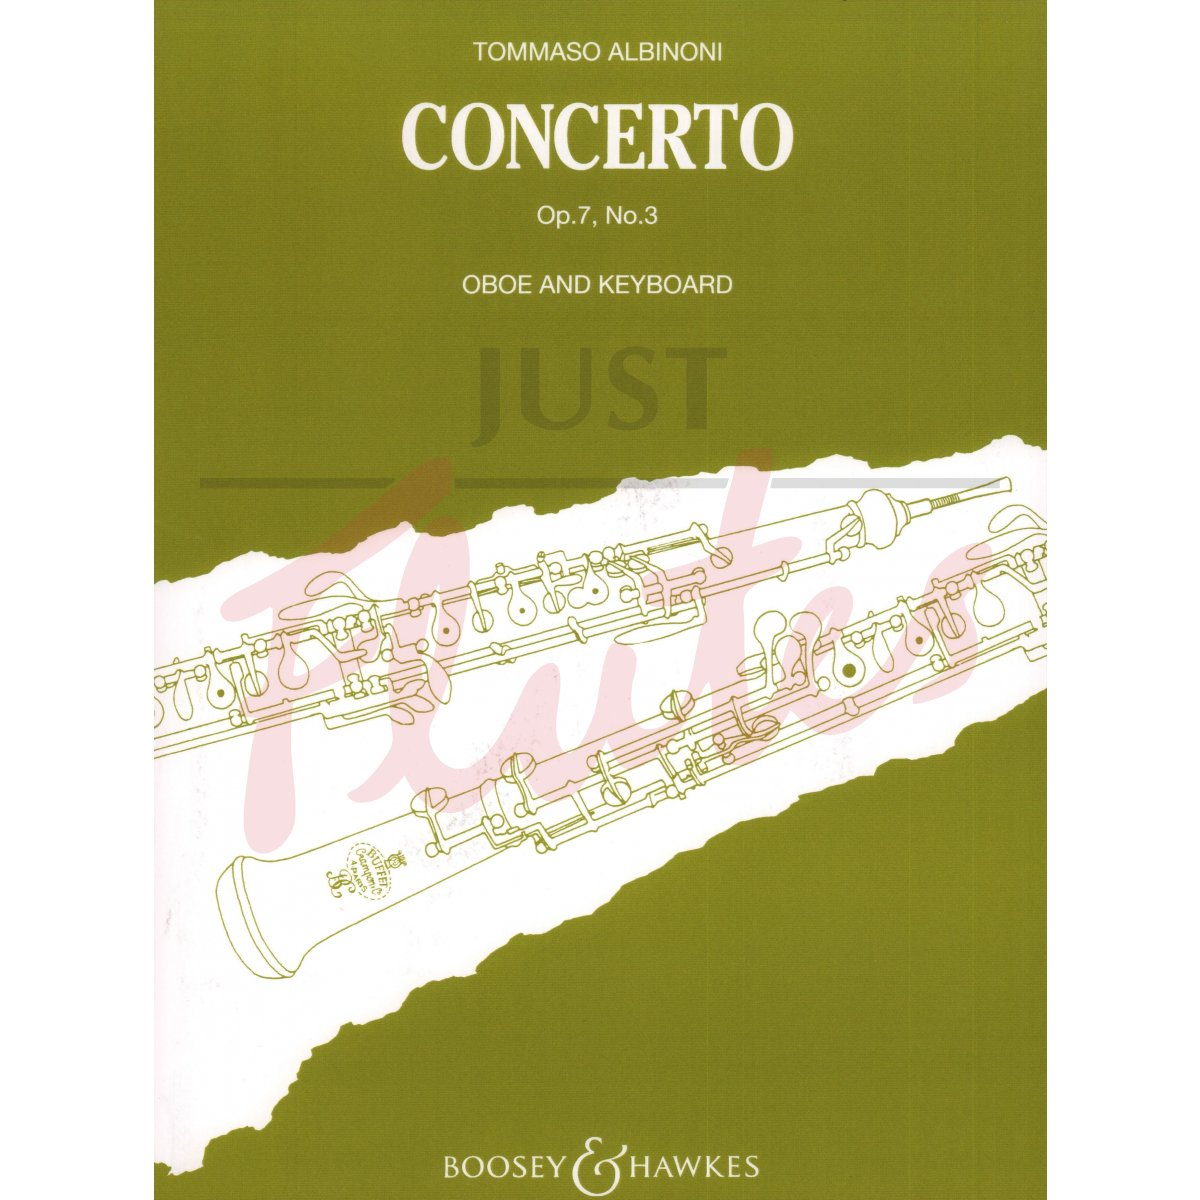 Concerto in Bb major for Oboe and Piano